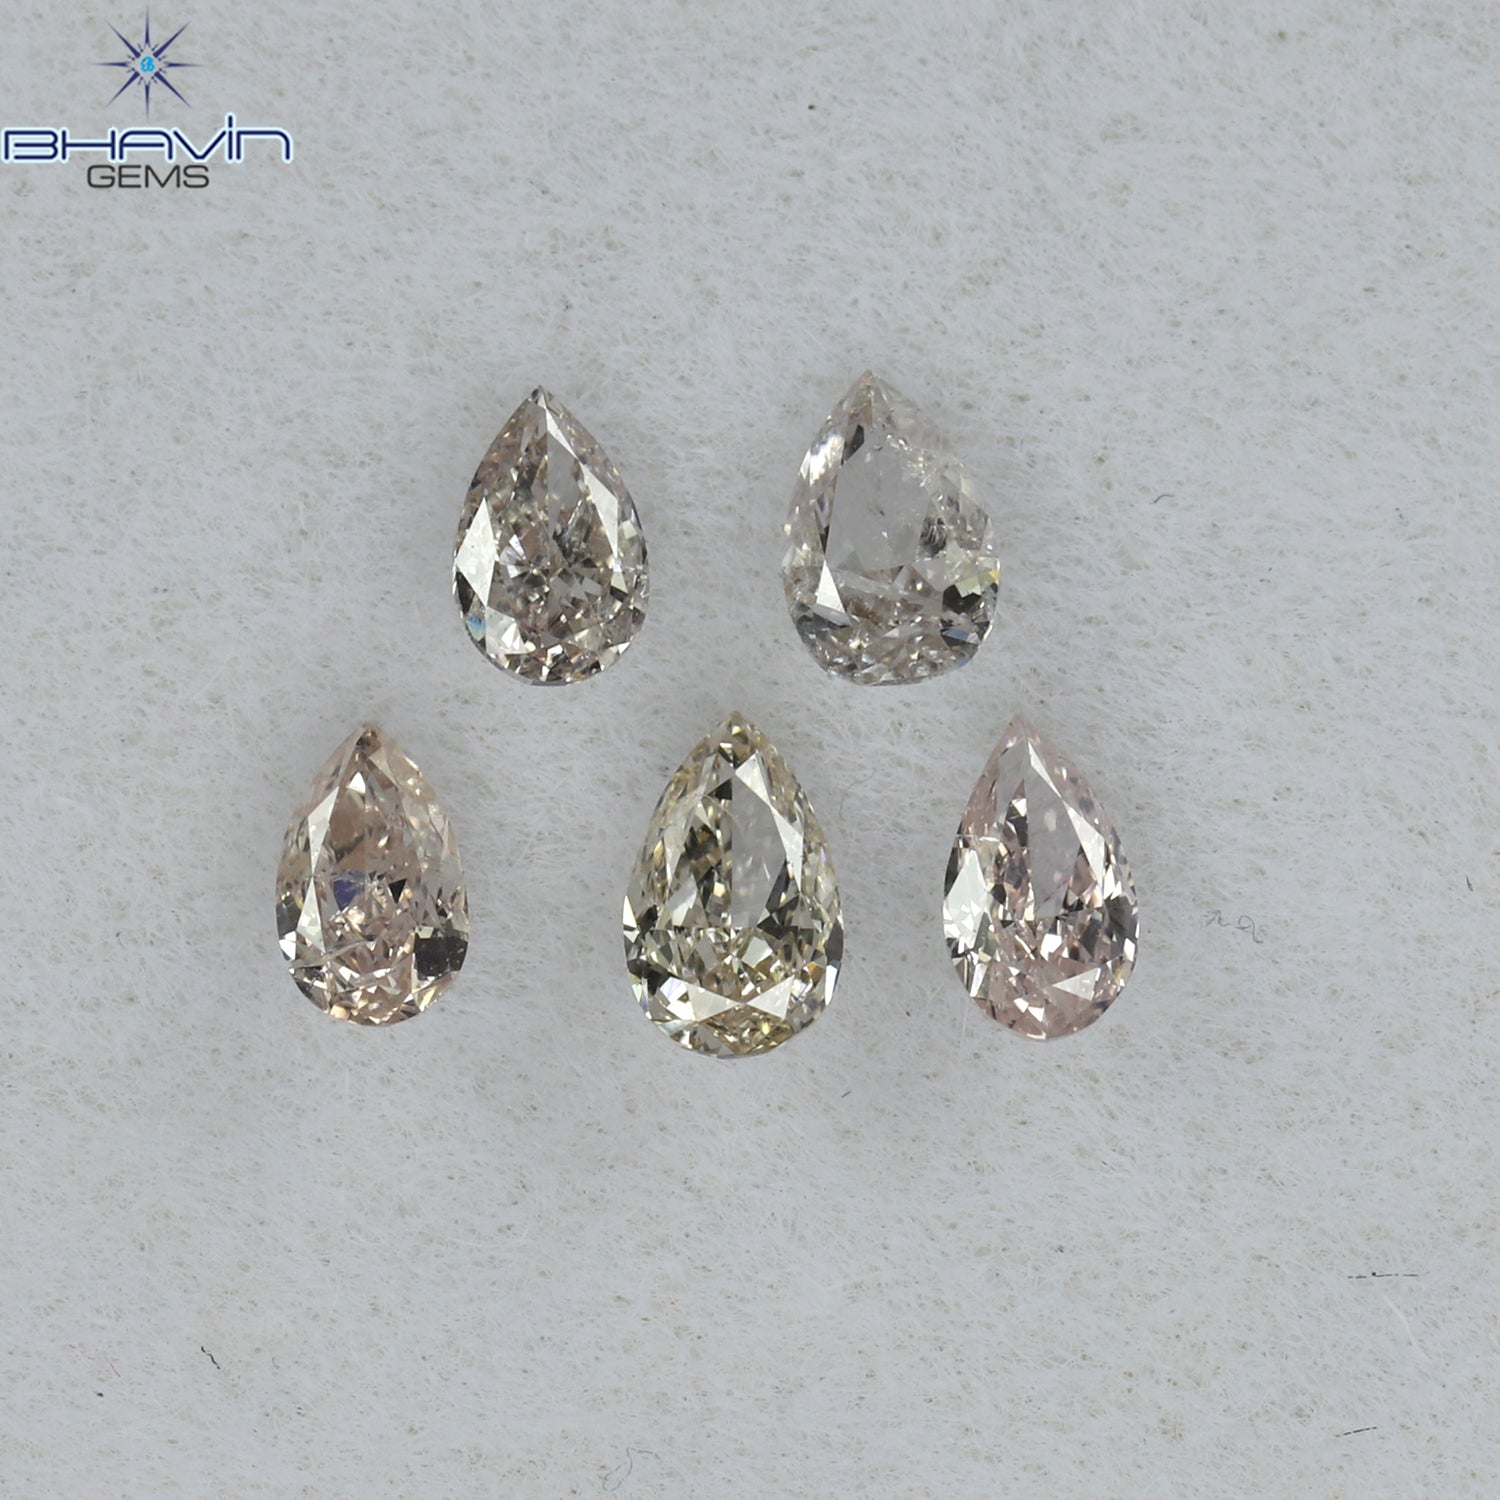 0.35 CT/5 Pcs Pear Shape Natural Diamond Pink Color SI Clarity (3.76 MM)